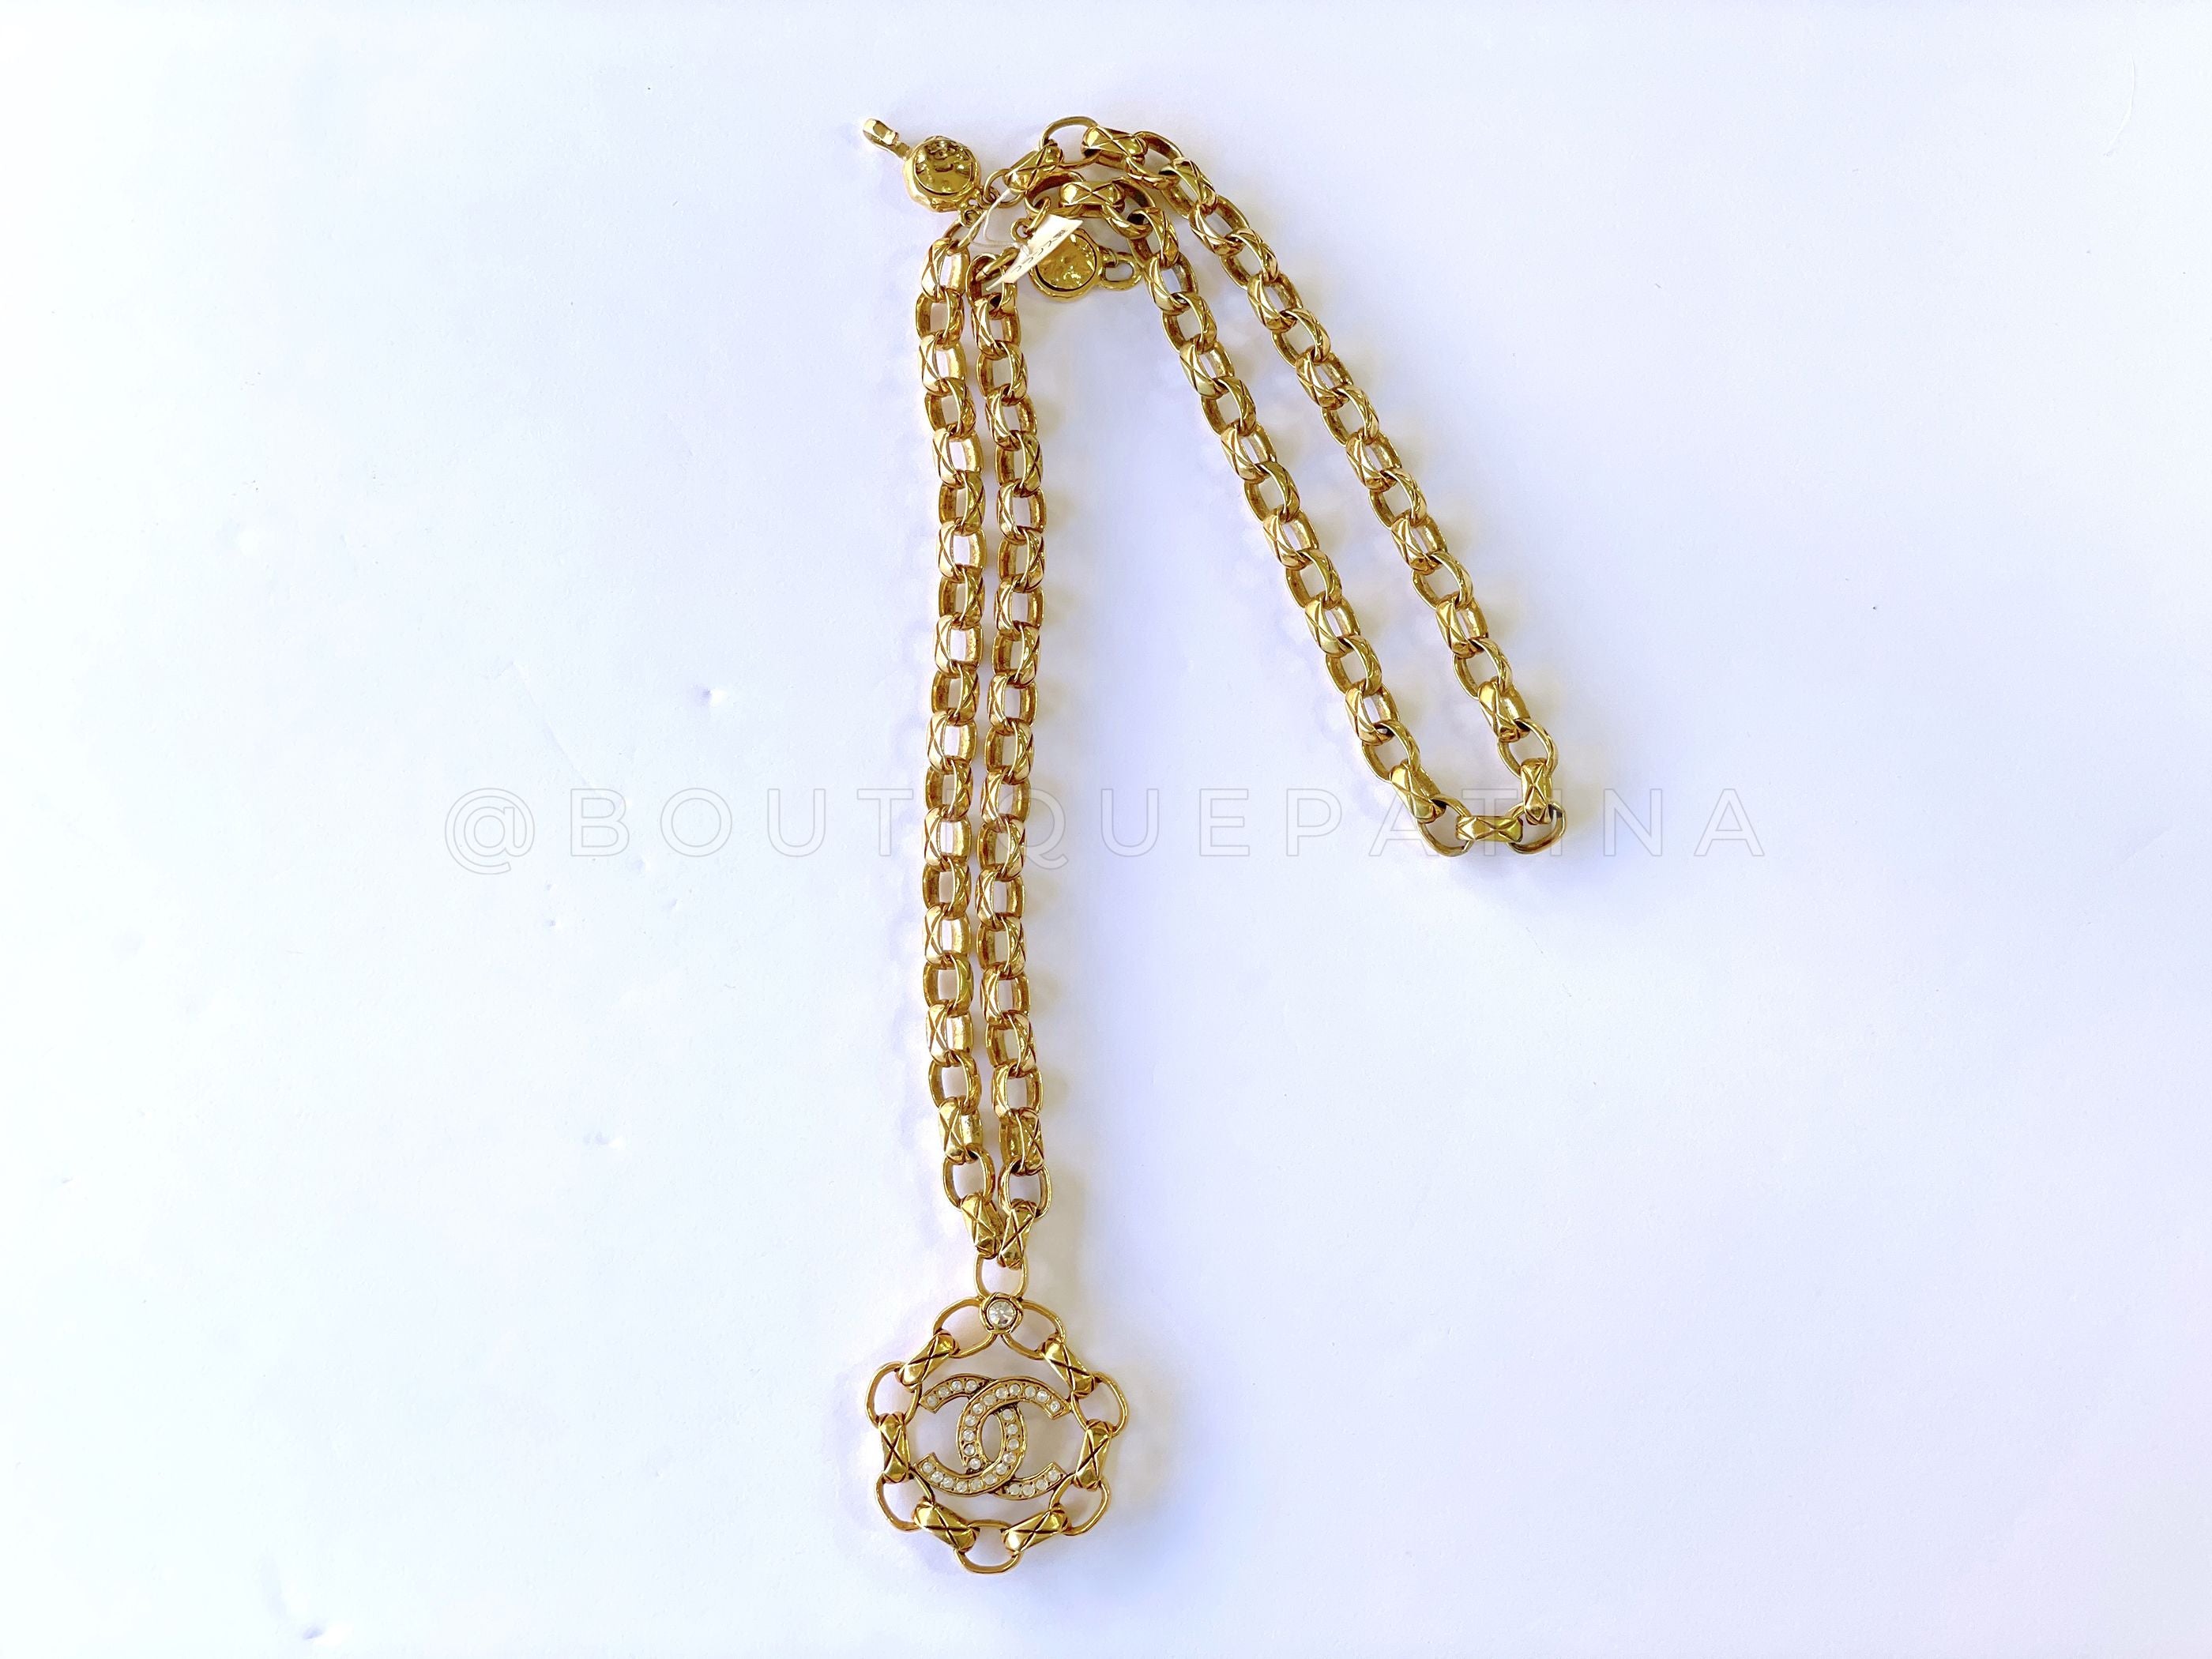 Chanel Vintage Collection 23 Rolo Chain Two Way Crystal CC Pendant Necklace Choker